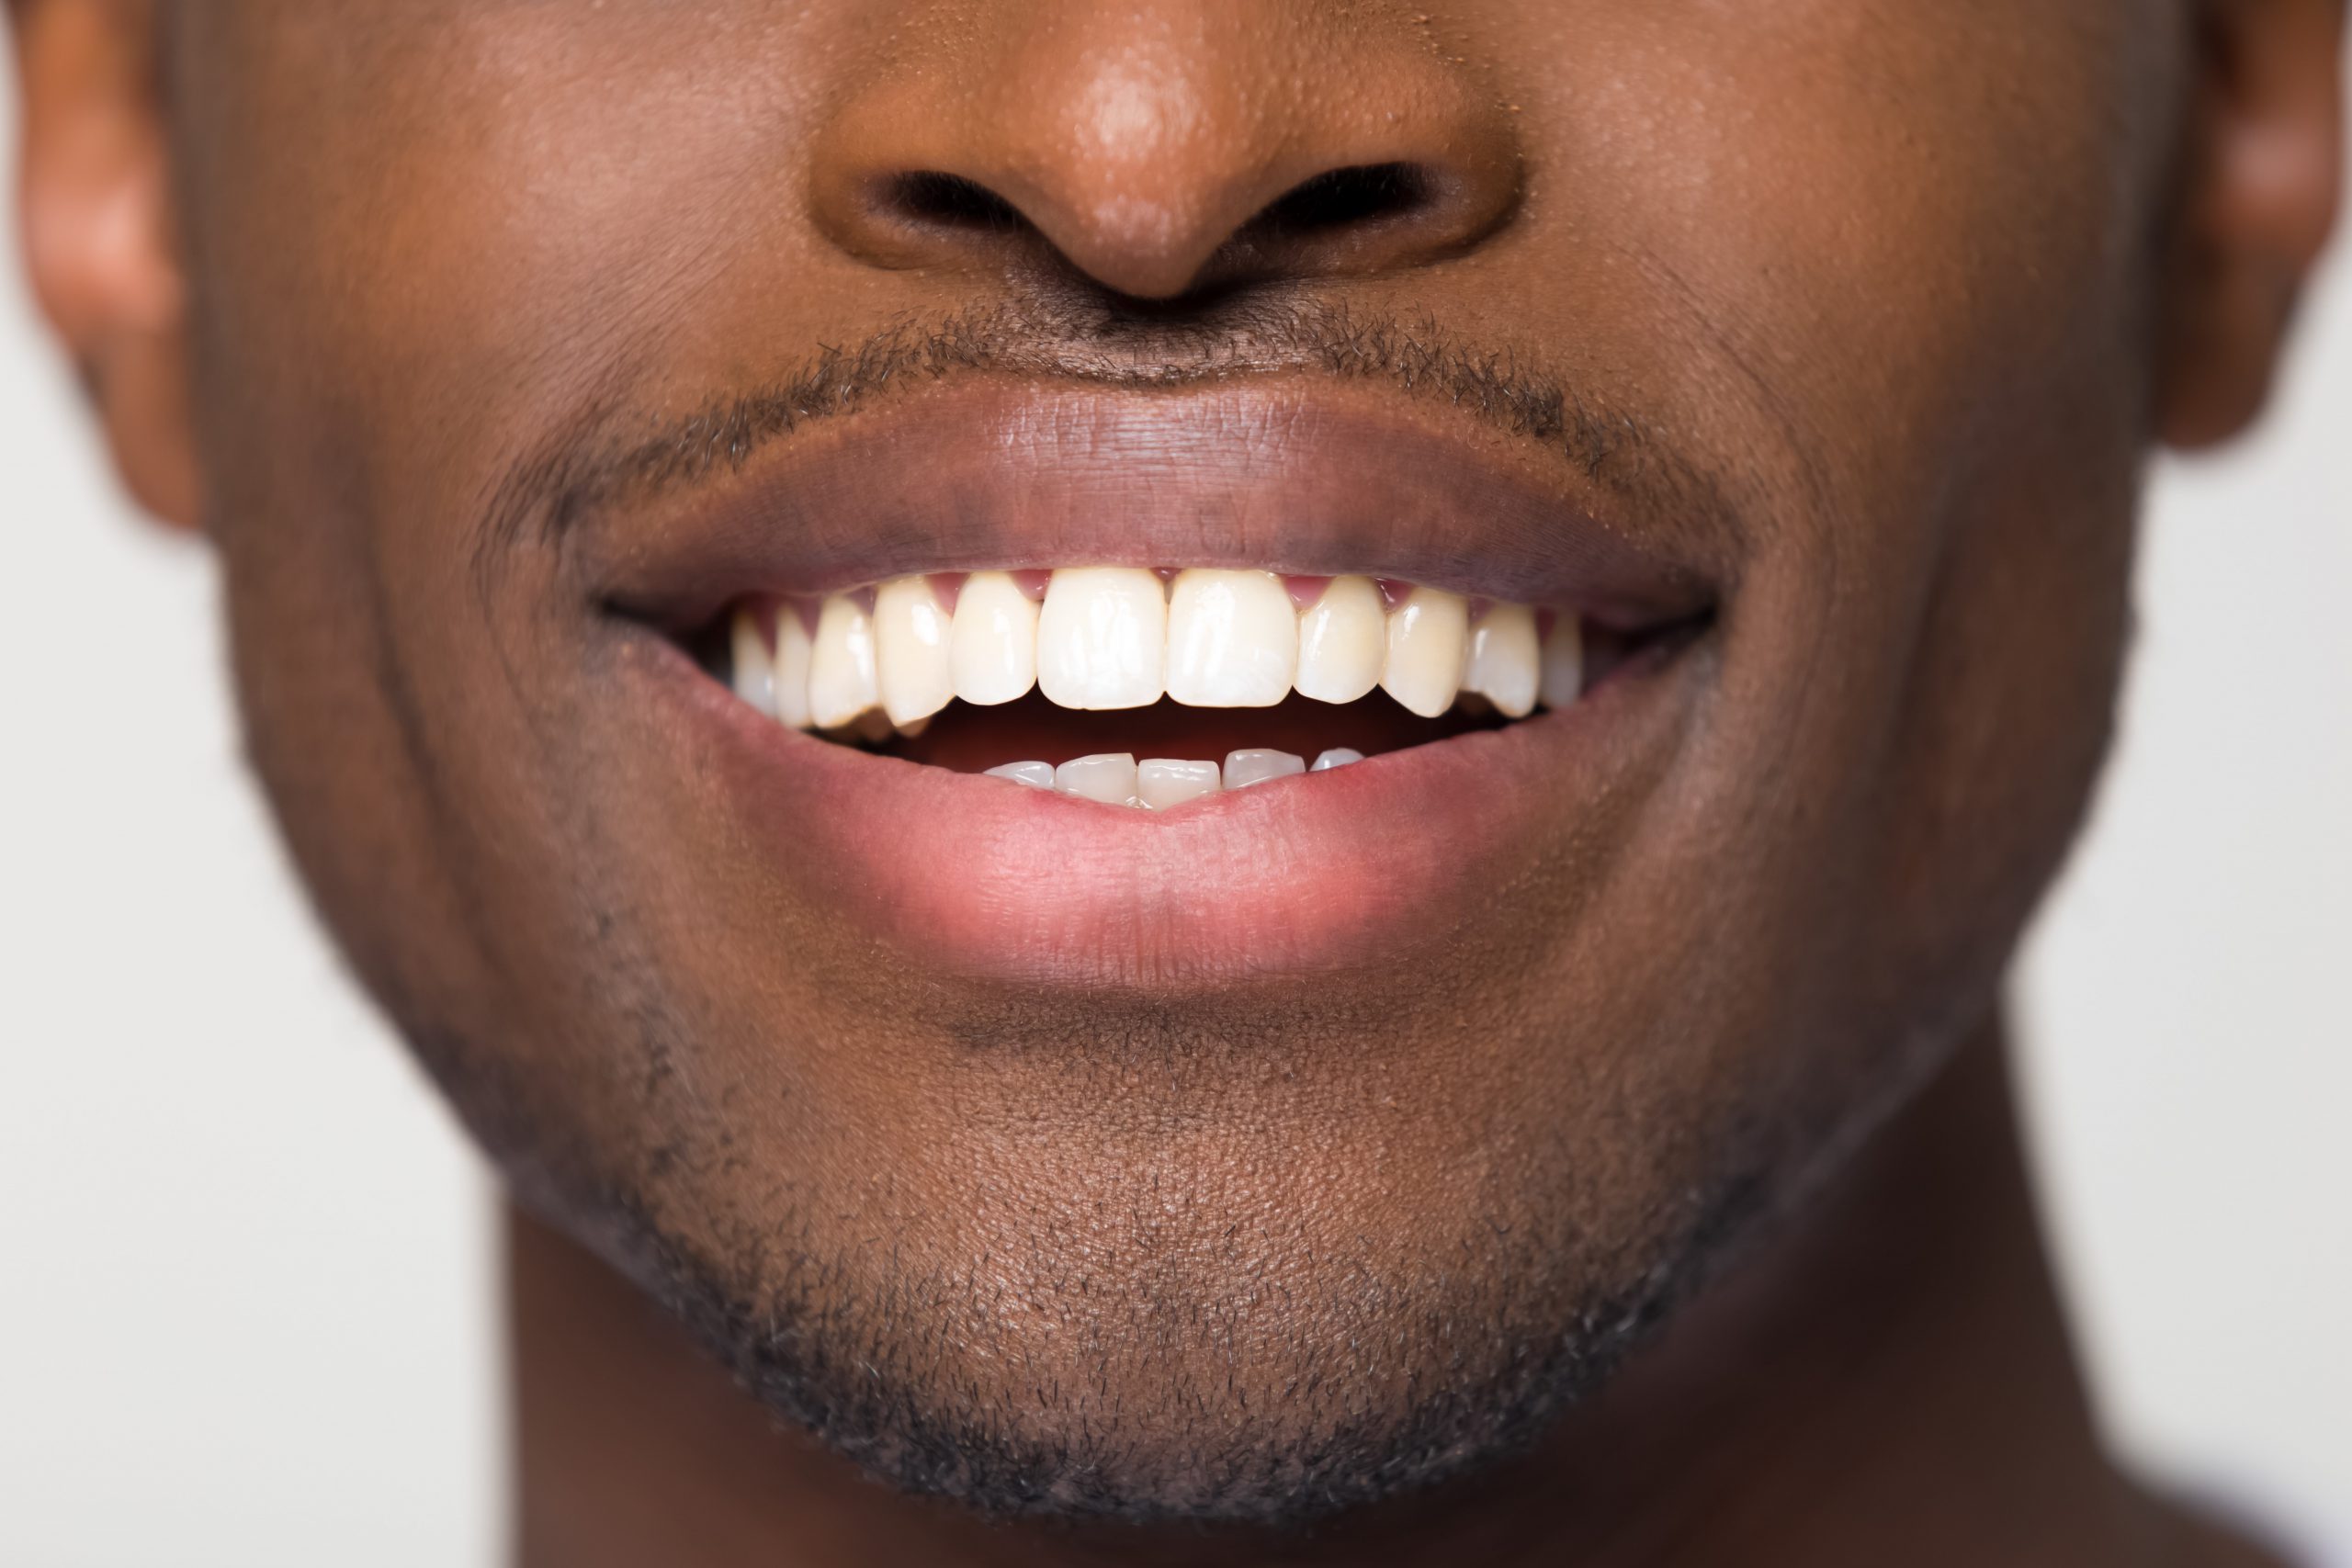 A man smiling in a way that shows his teeth.